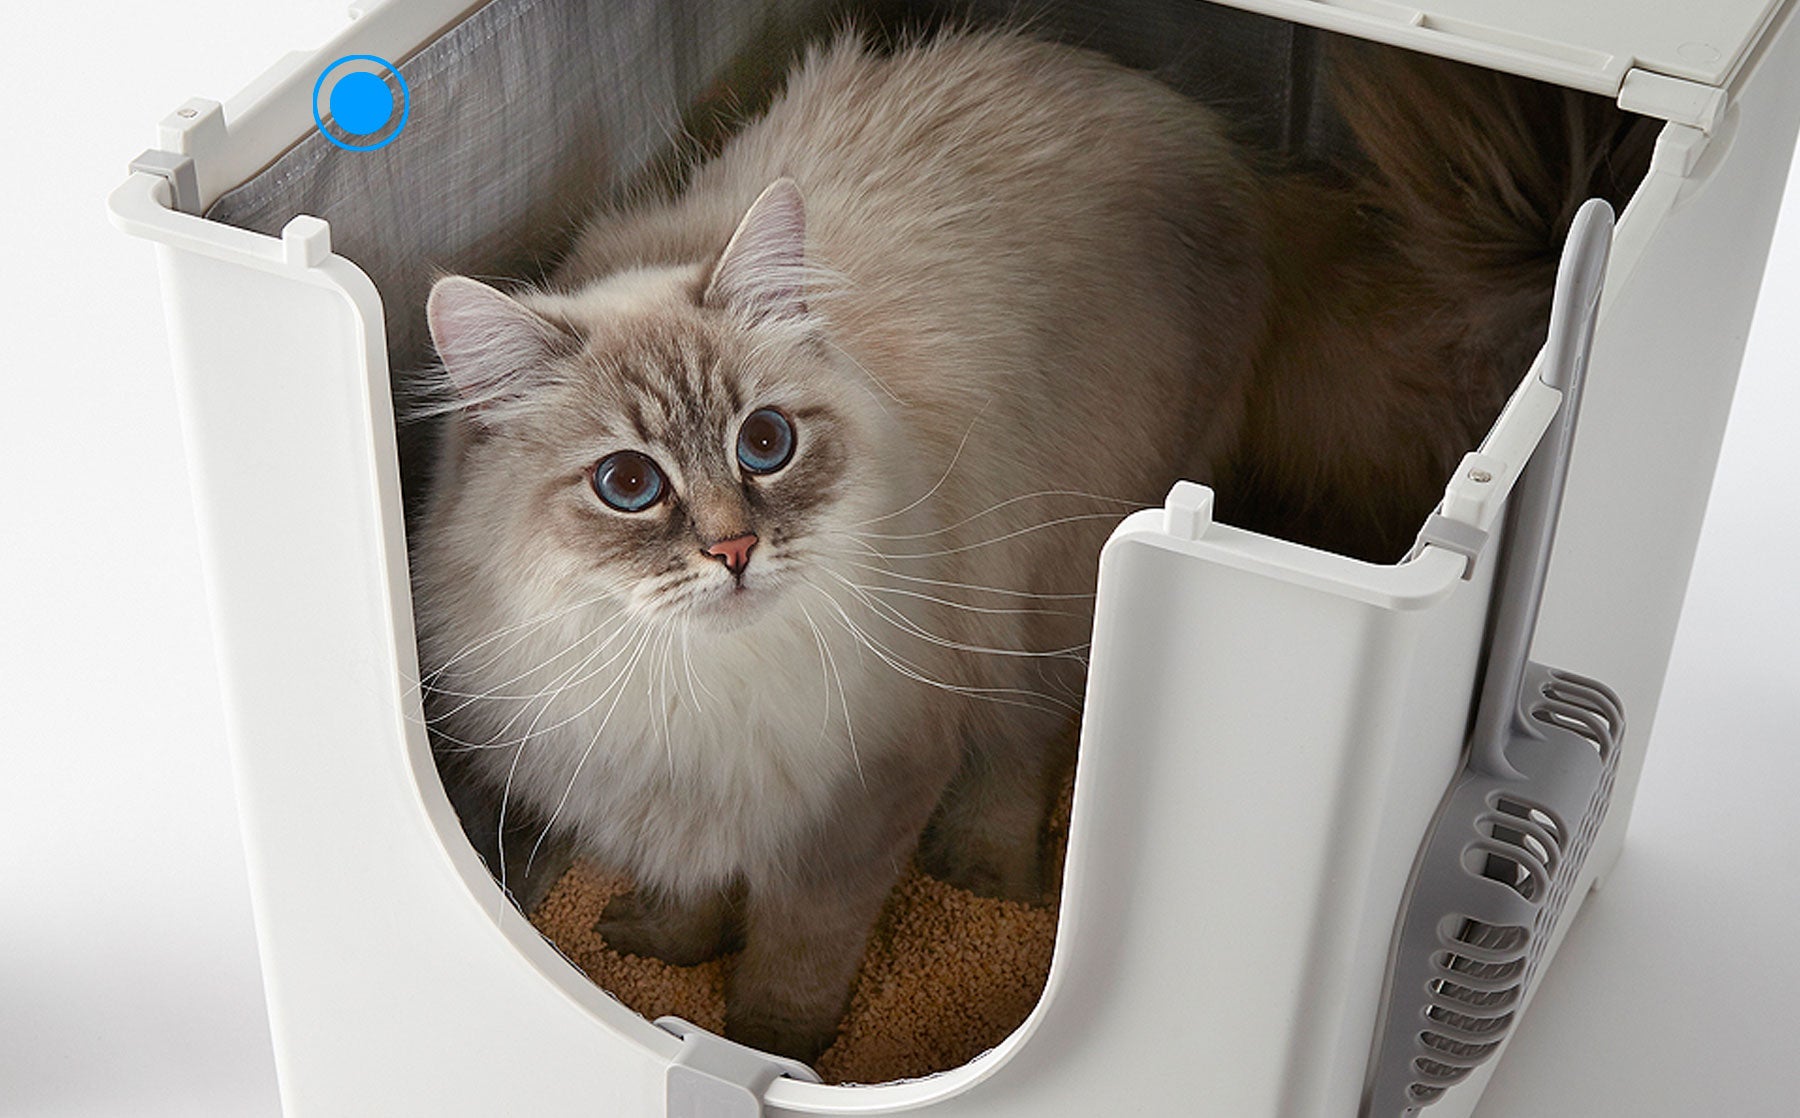 Why use Modkat's reusable cat litter liners? - Modkat